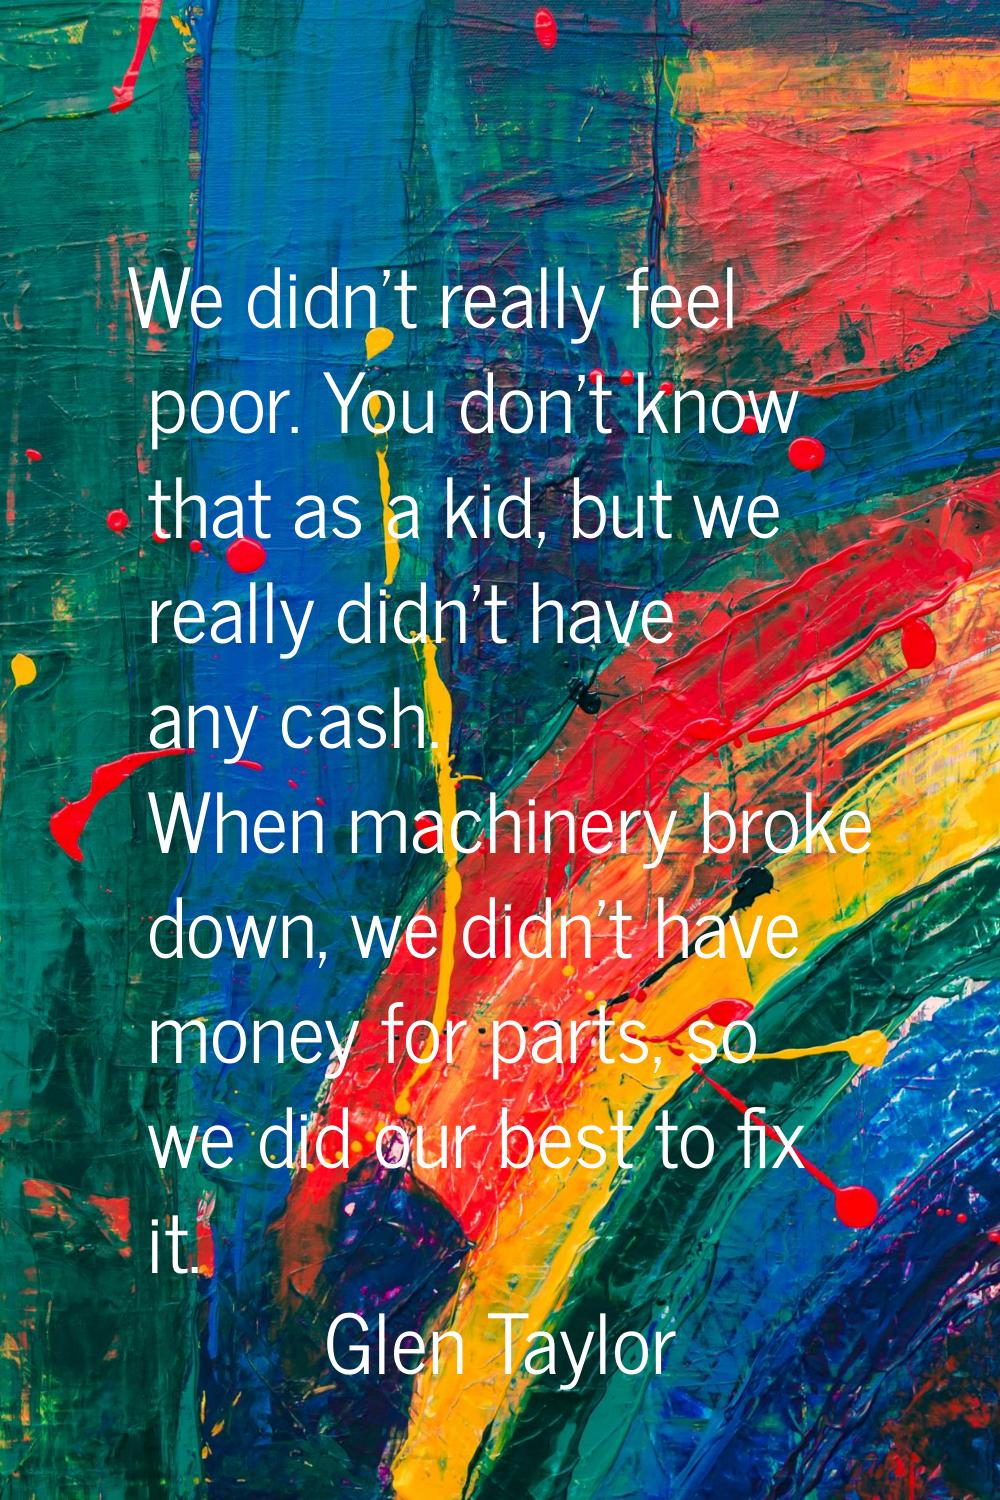 We didn't really feel poor. You don't know that as a kid, but we really didn't have any cash. When 